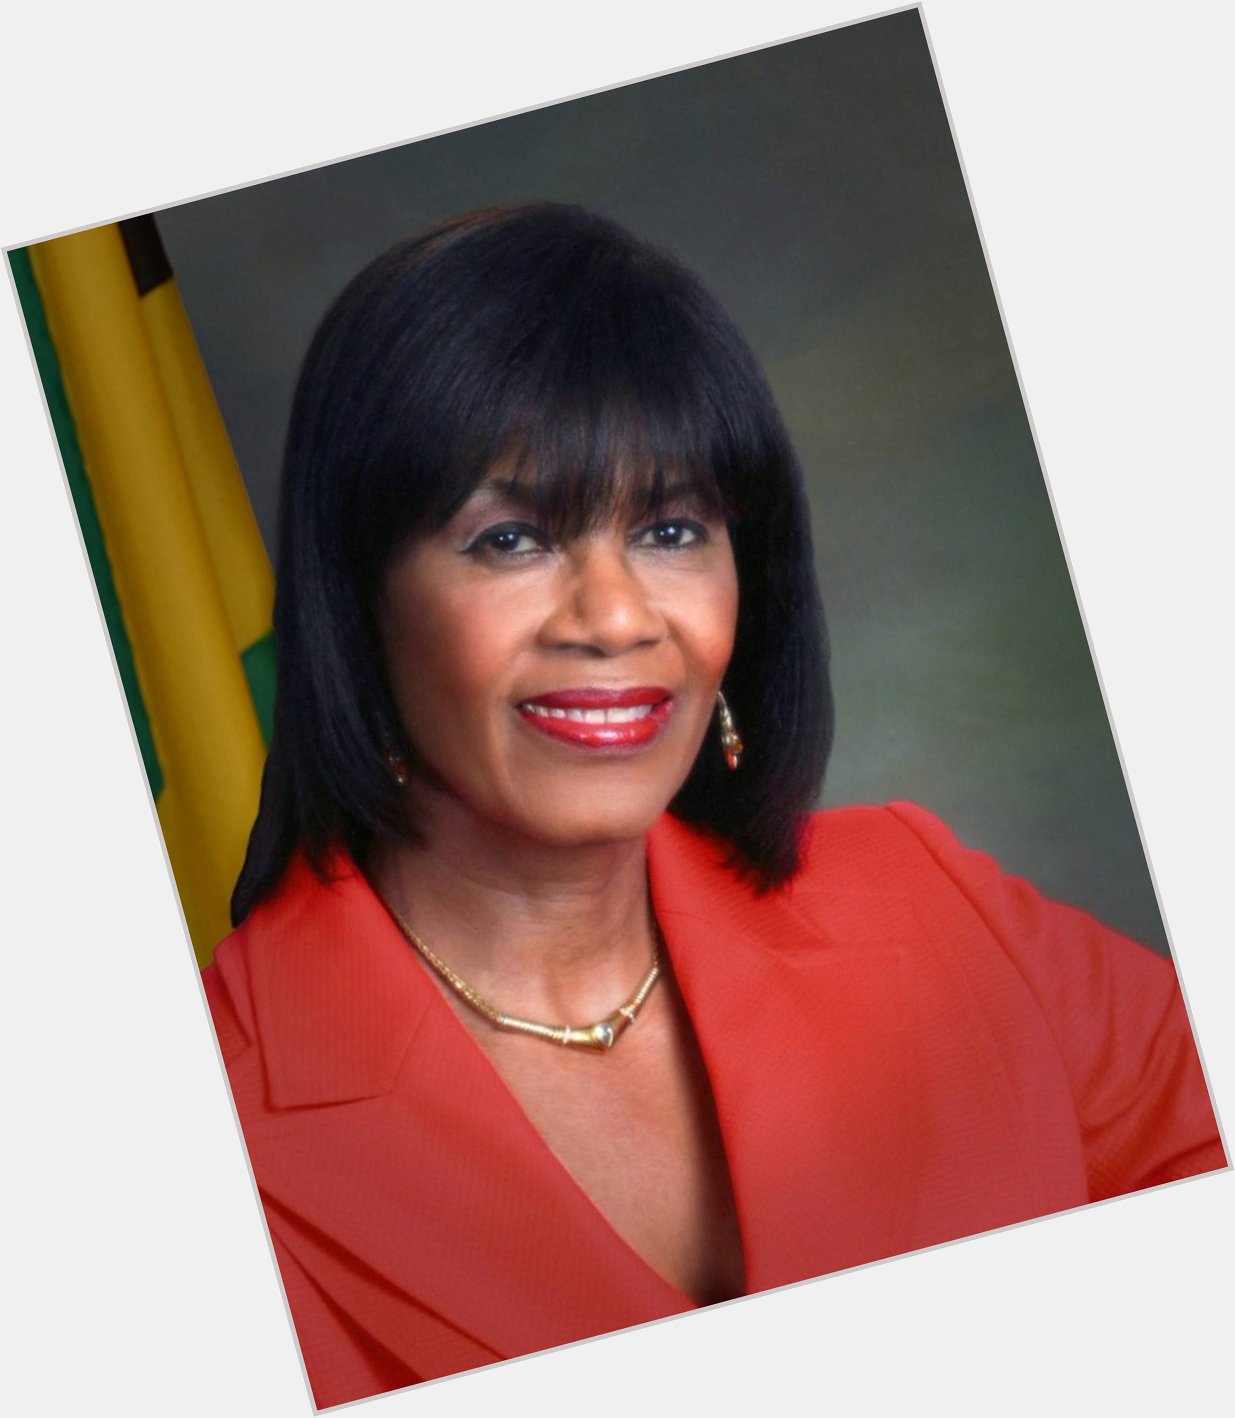 Happy Birthday to The Most Honourable Portia Simpson Miller O.N., M.P
The first female Prime Minister of Jamaica 